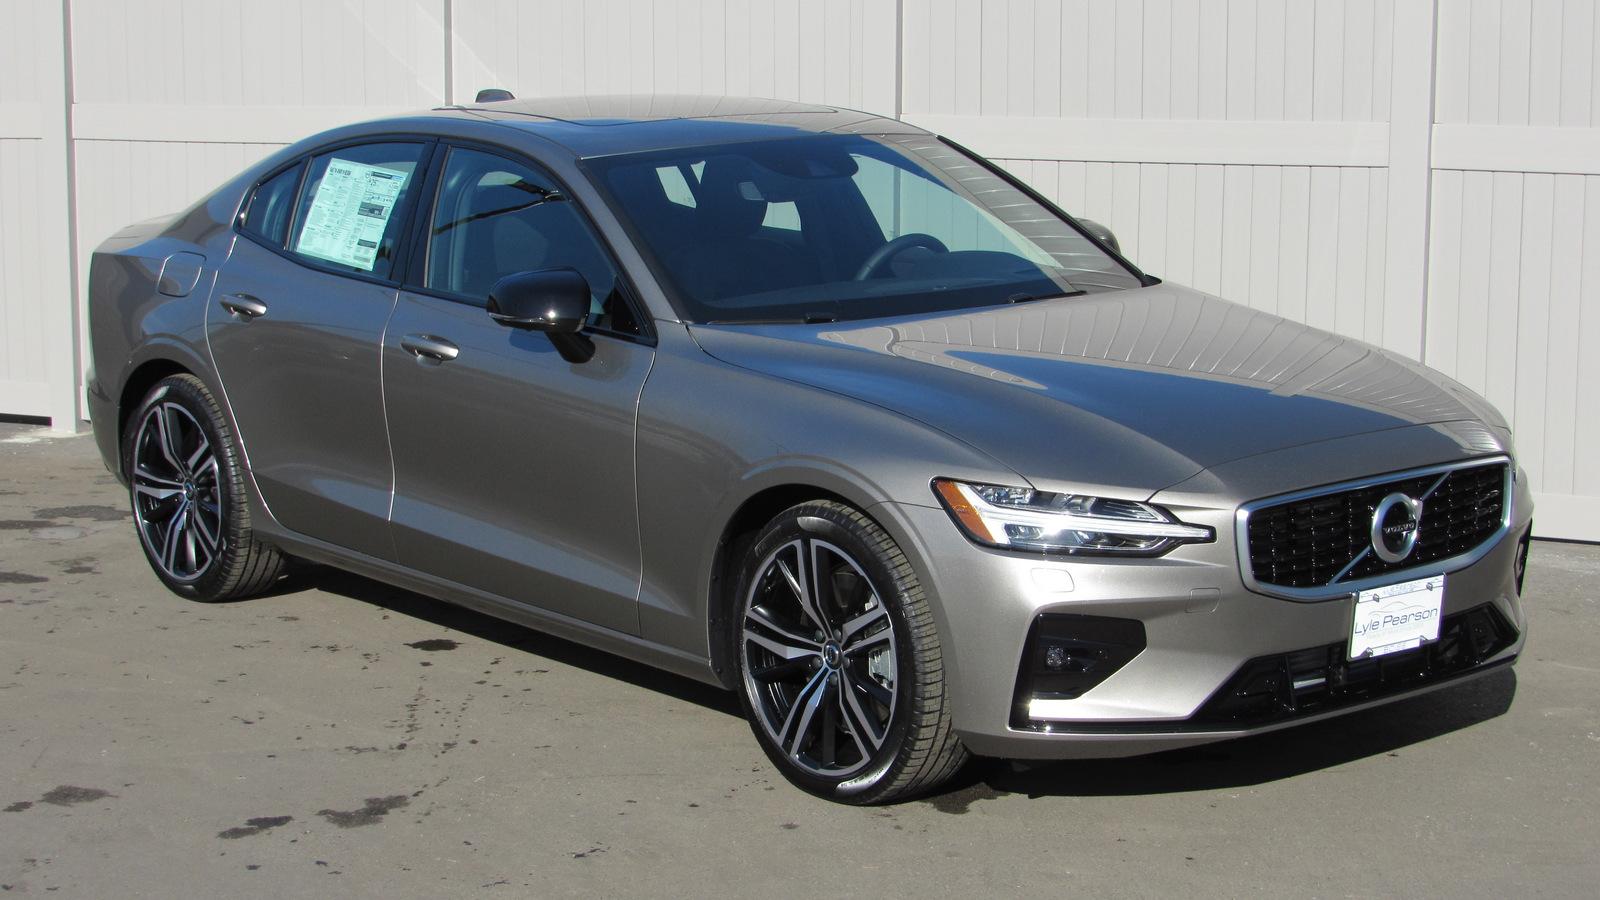 New 2019 Volvo S60 T6 AWD RDesign 4dr Car in Boise